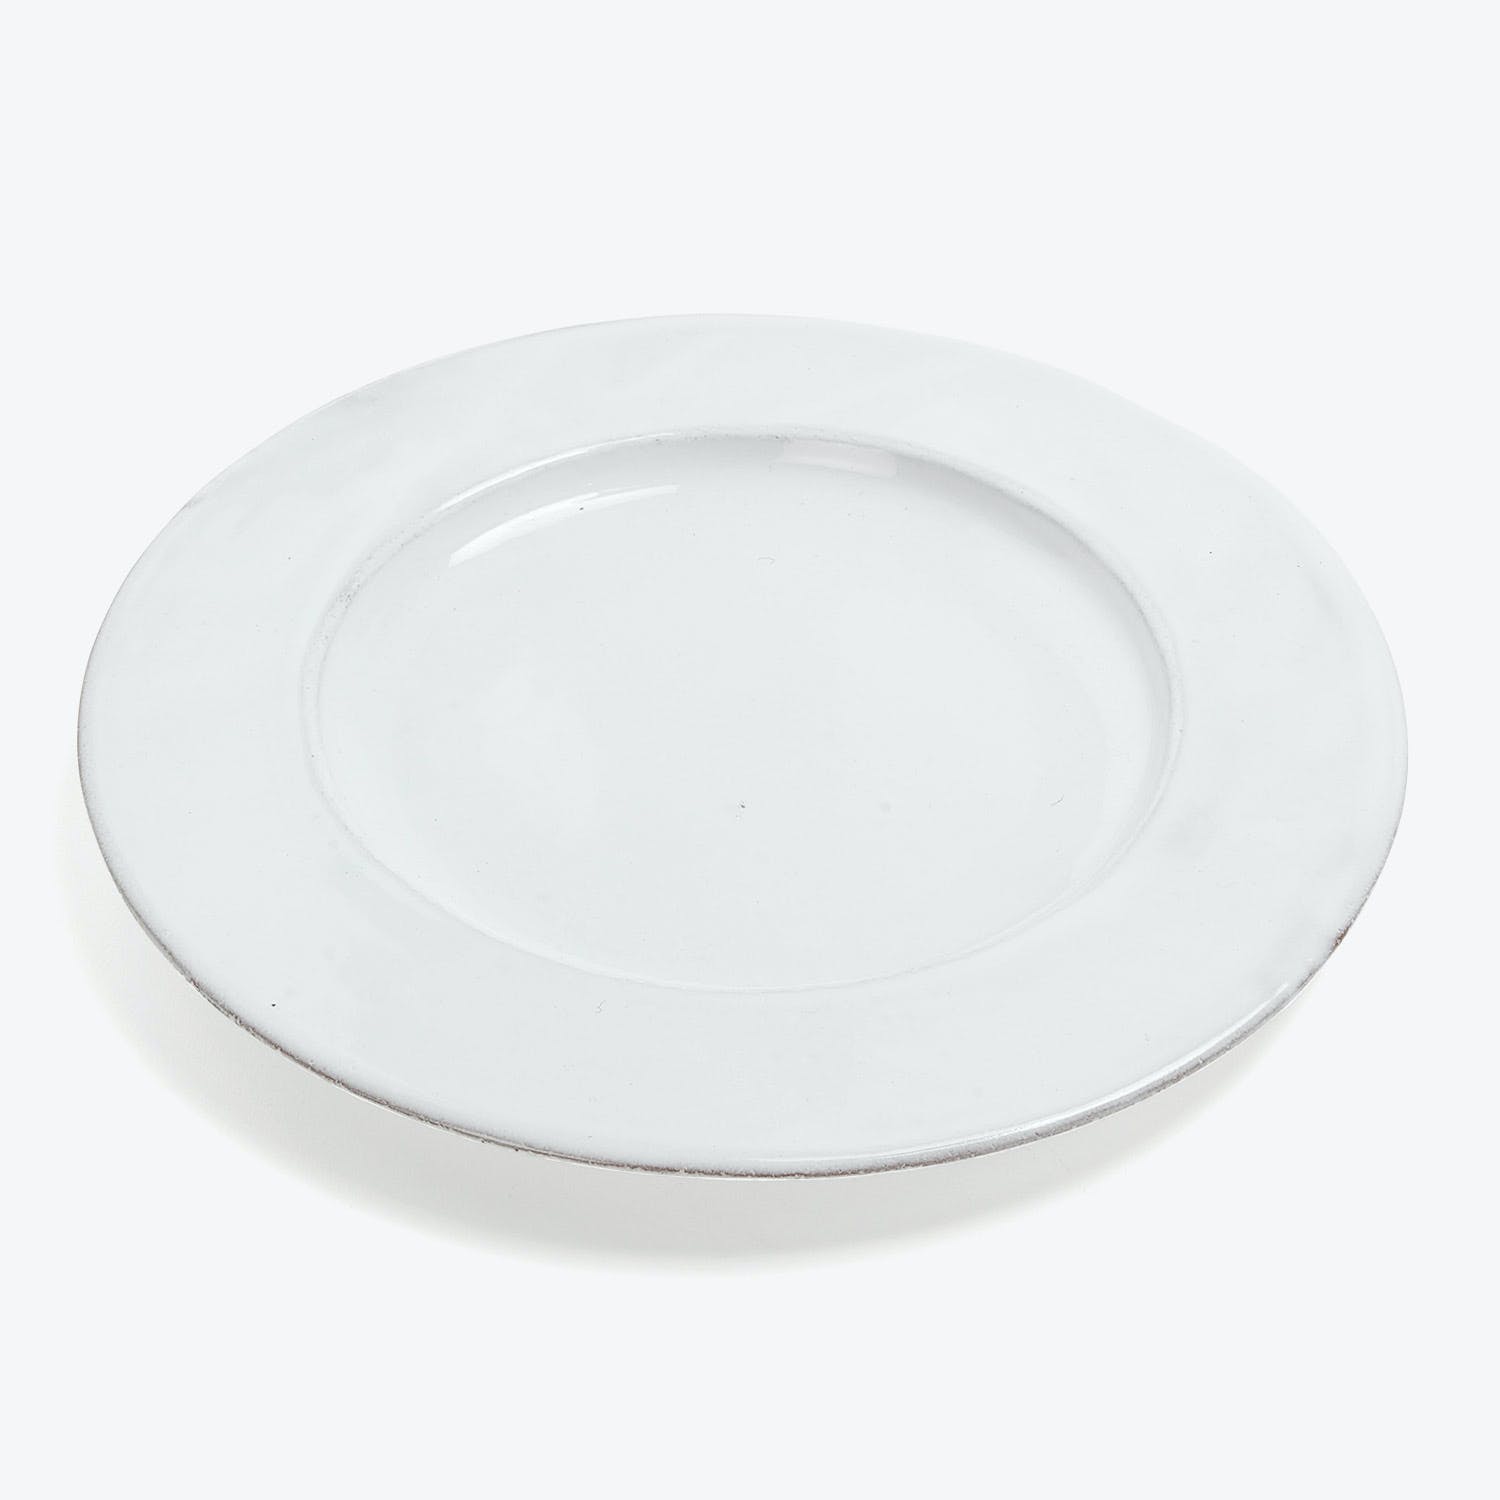 Minimalist white plate with a subtle raised edge and center depression.